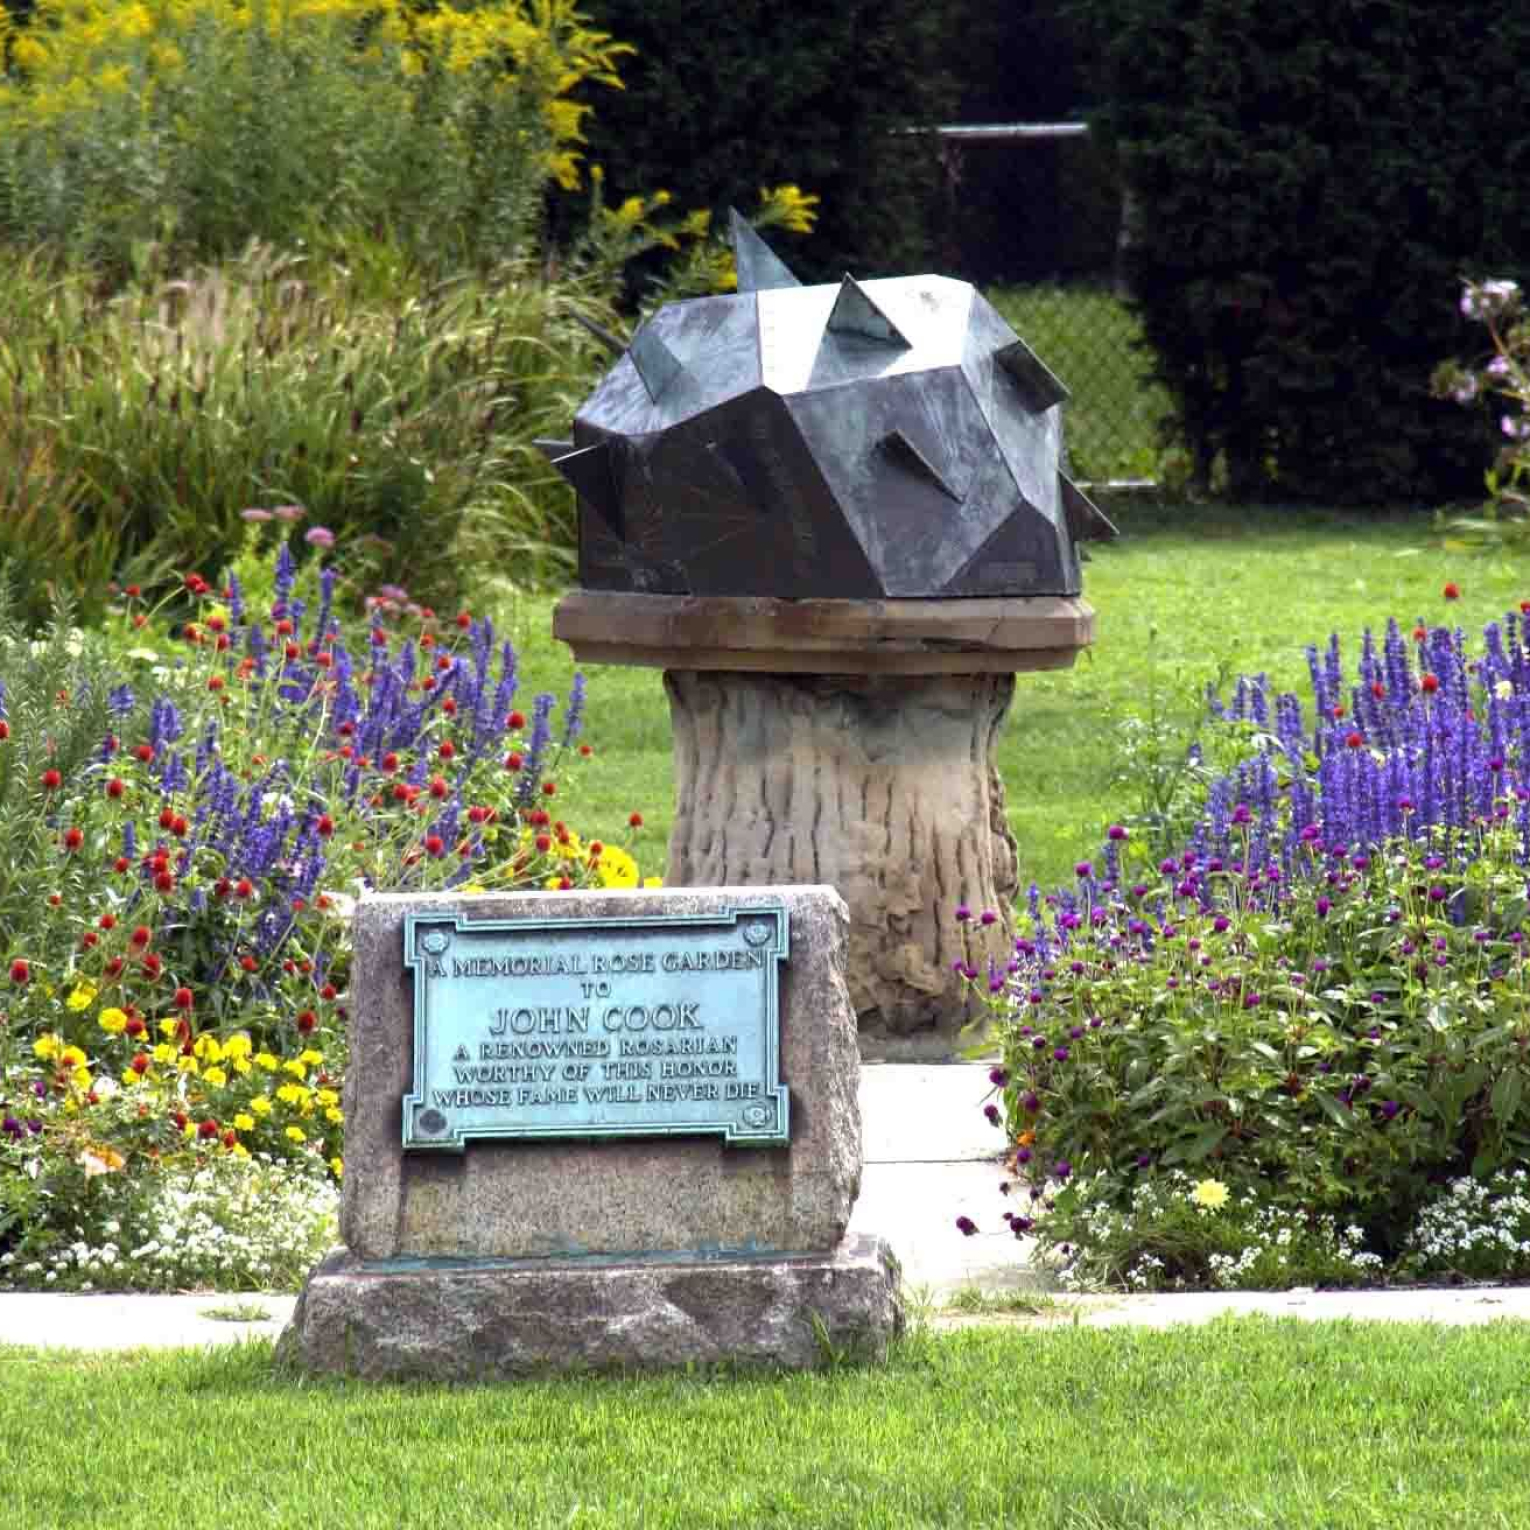 Vibrant flowers surrounding the gnomic block sundial with a dedication to John Cook, renowned rosarian in front.